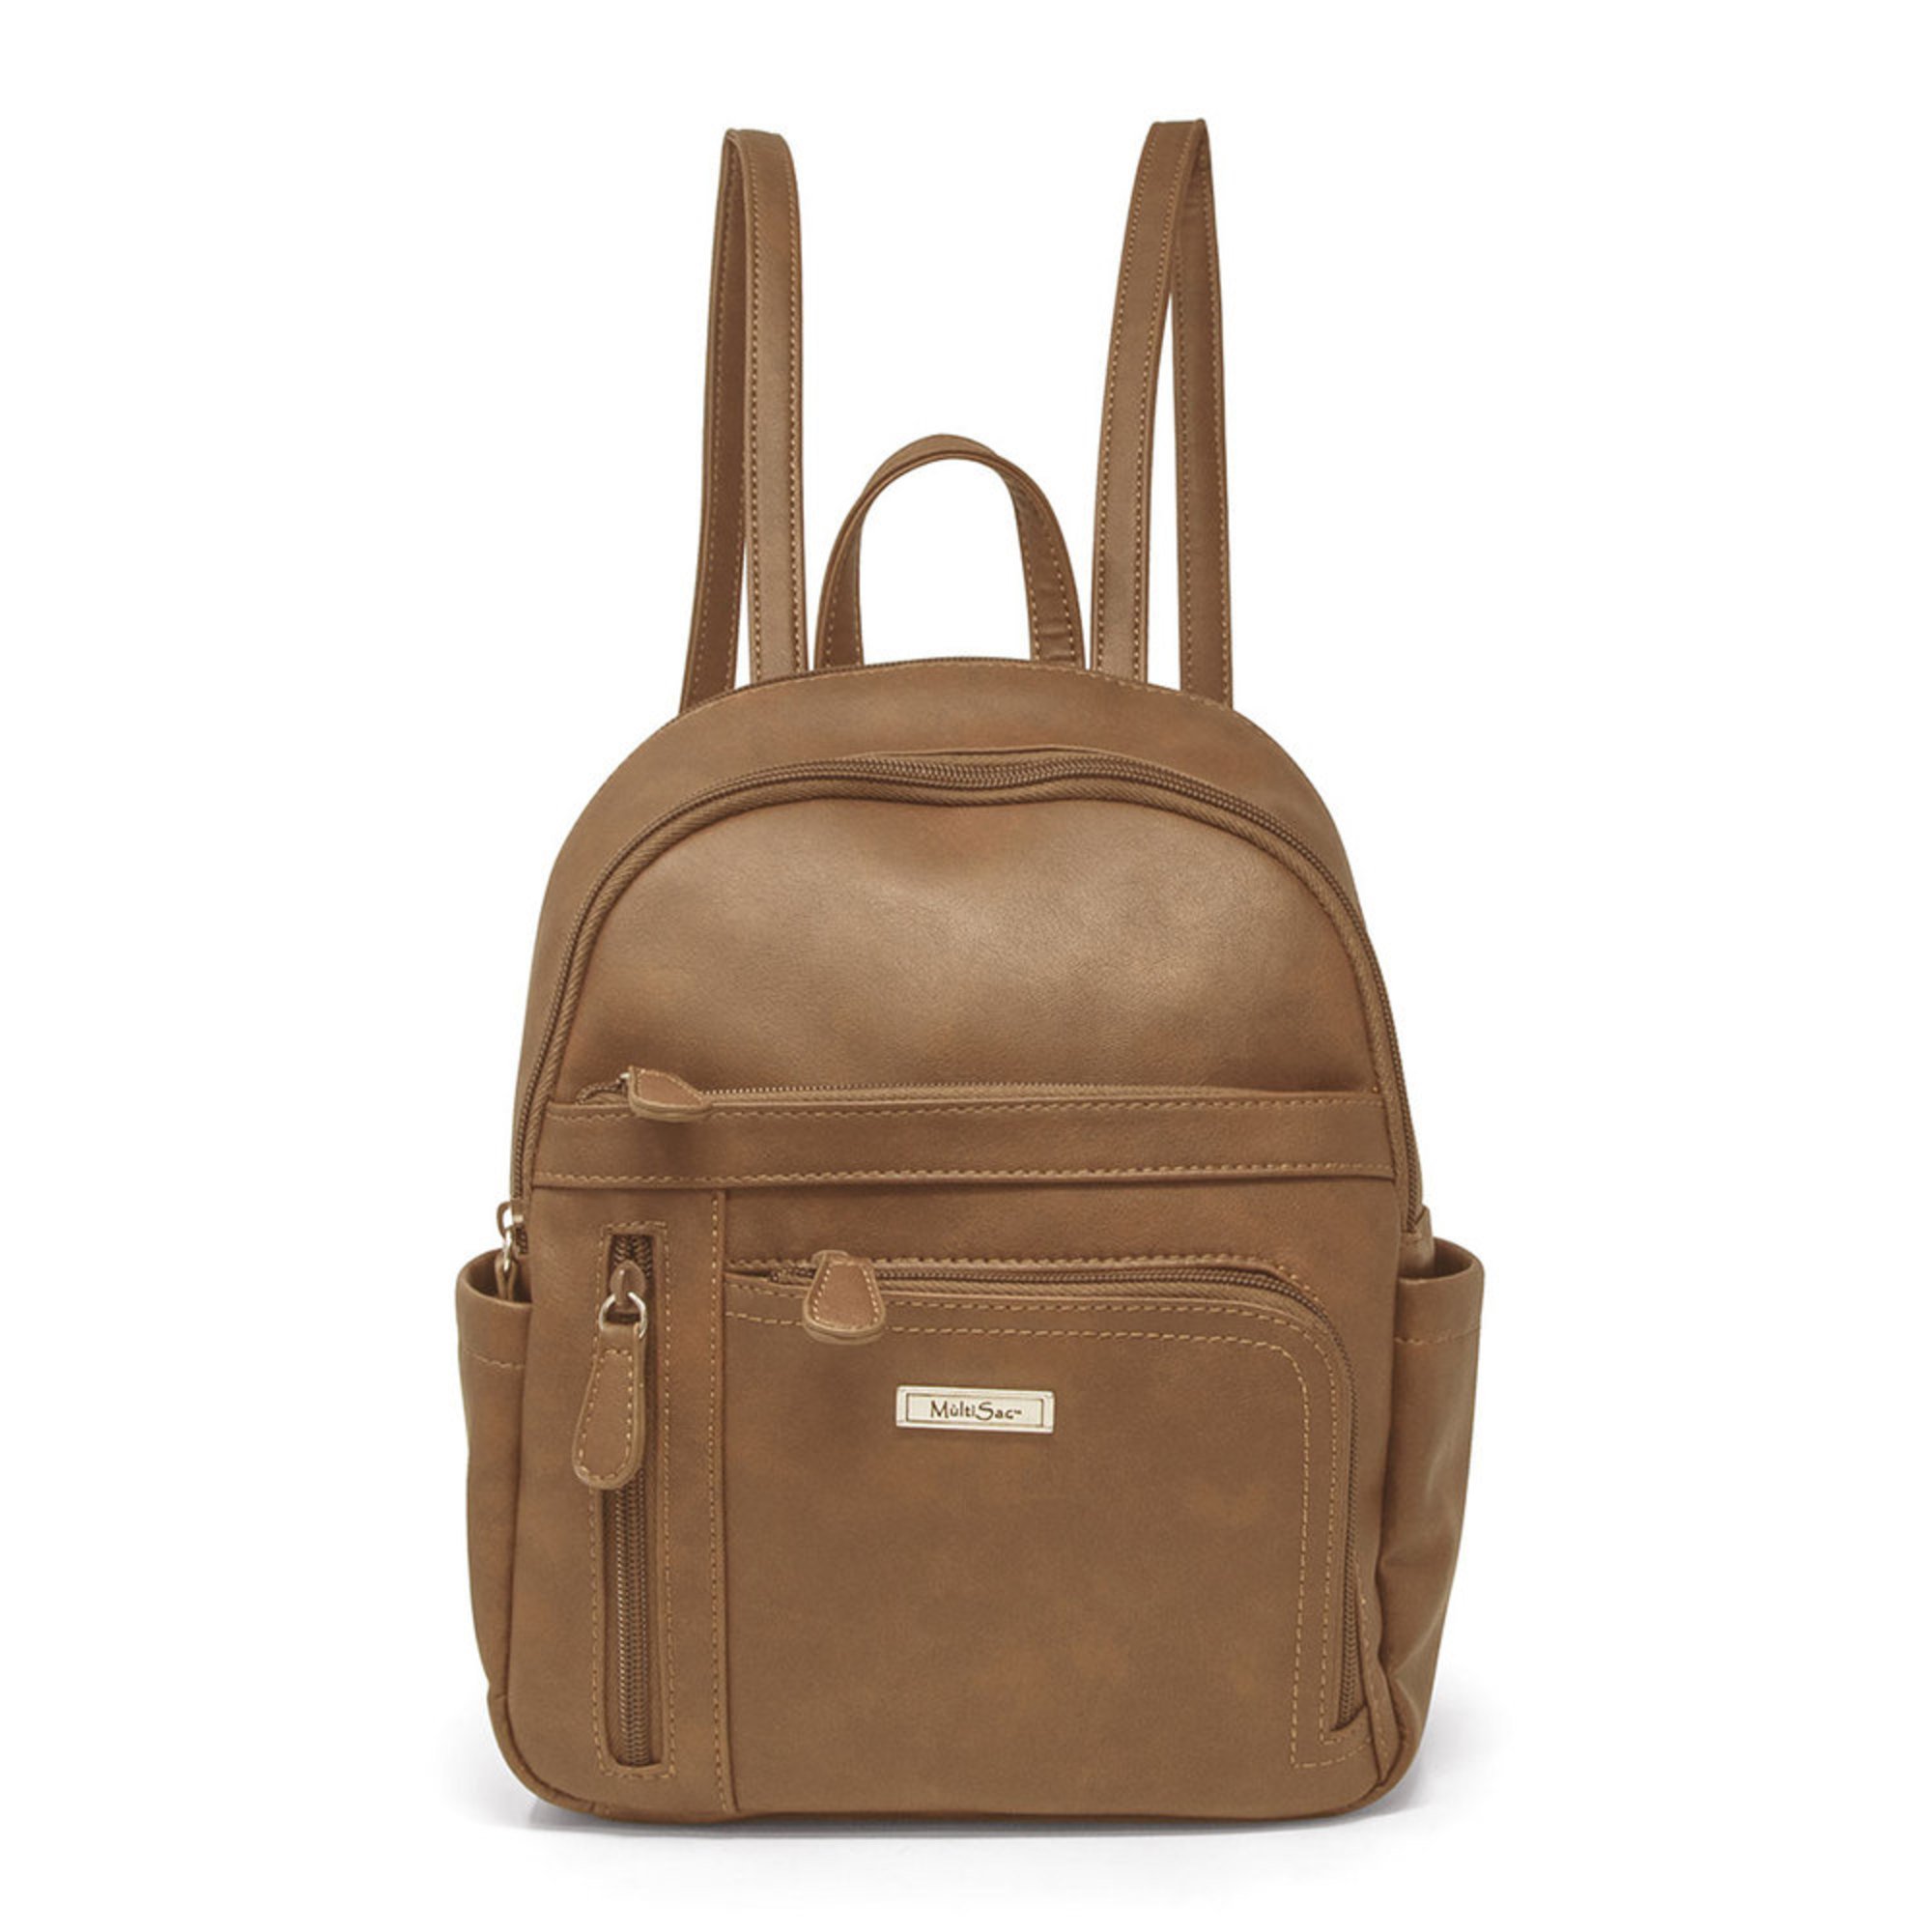 Multi Sac Adele Backpack | Women's Backpacks | Accessories - Shop Your ...